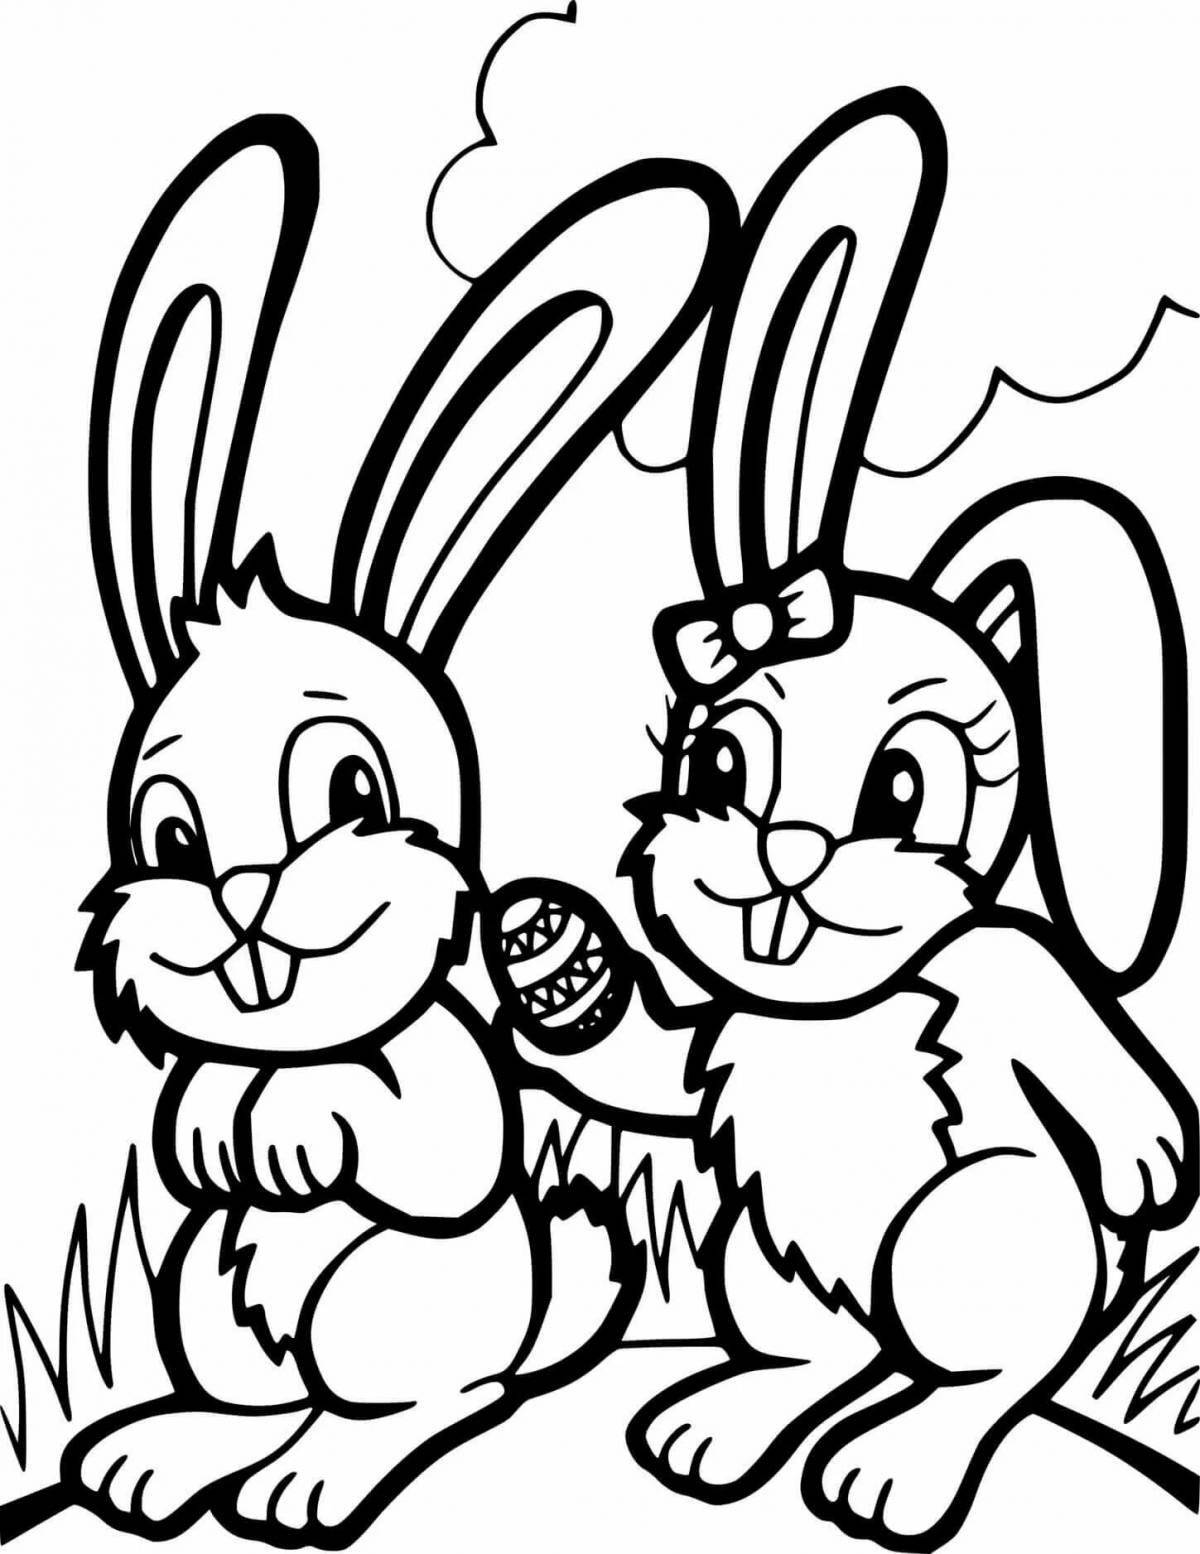 Adorable rabbit and cat coloring page